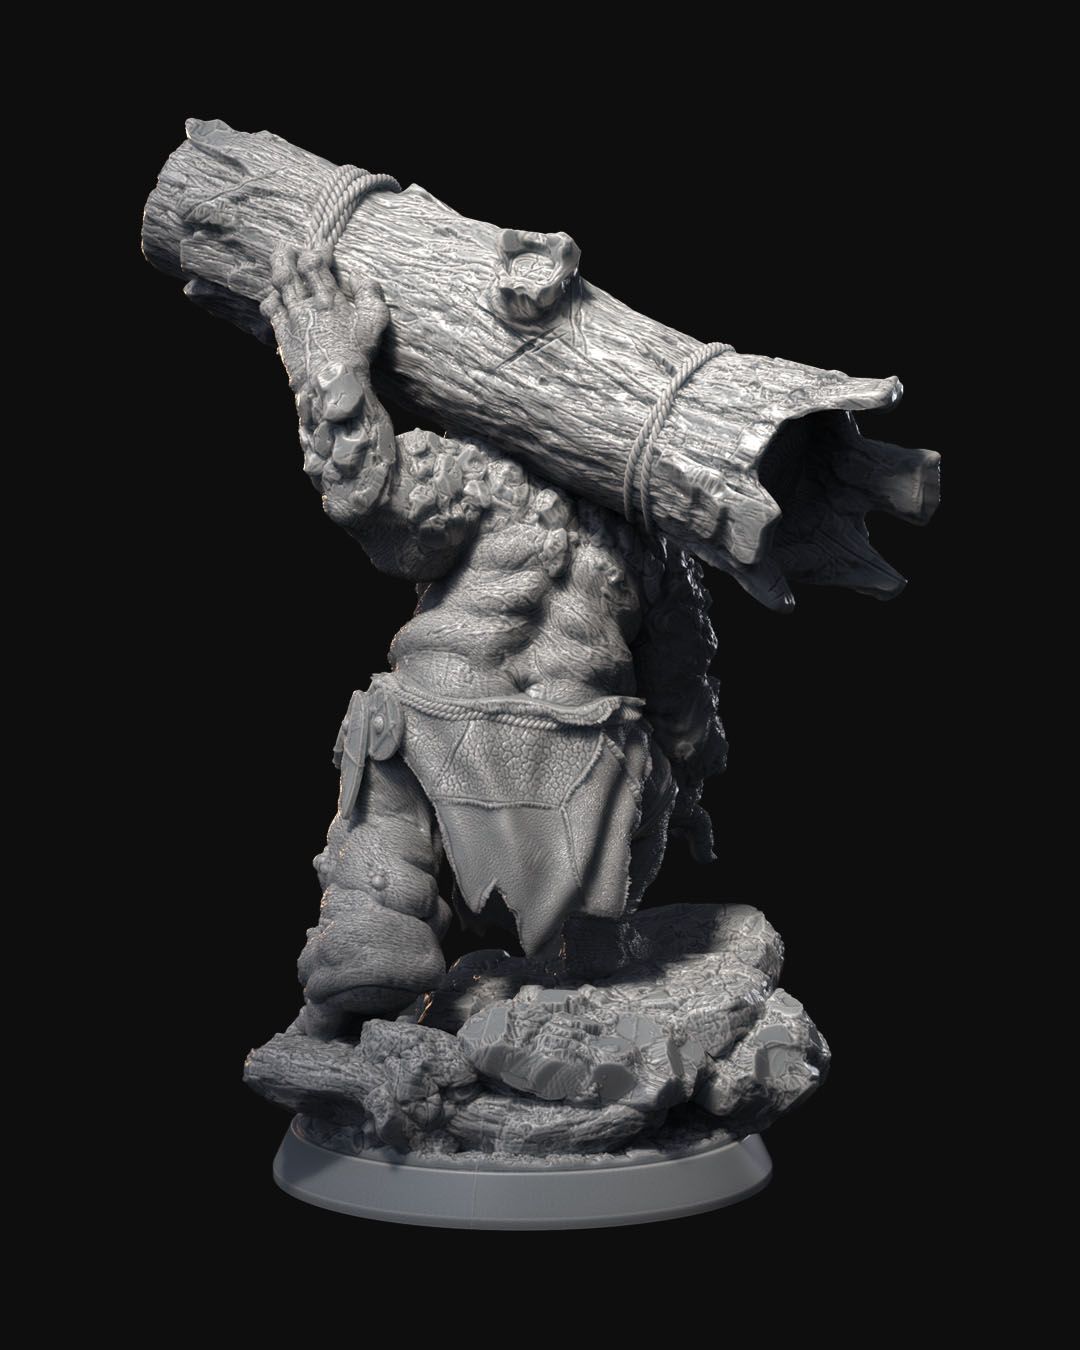 Orthos, the Troll - Goblin Invasion - Miniatures